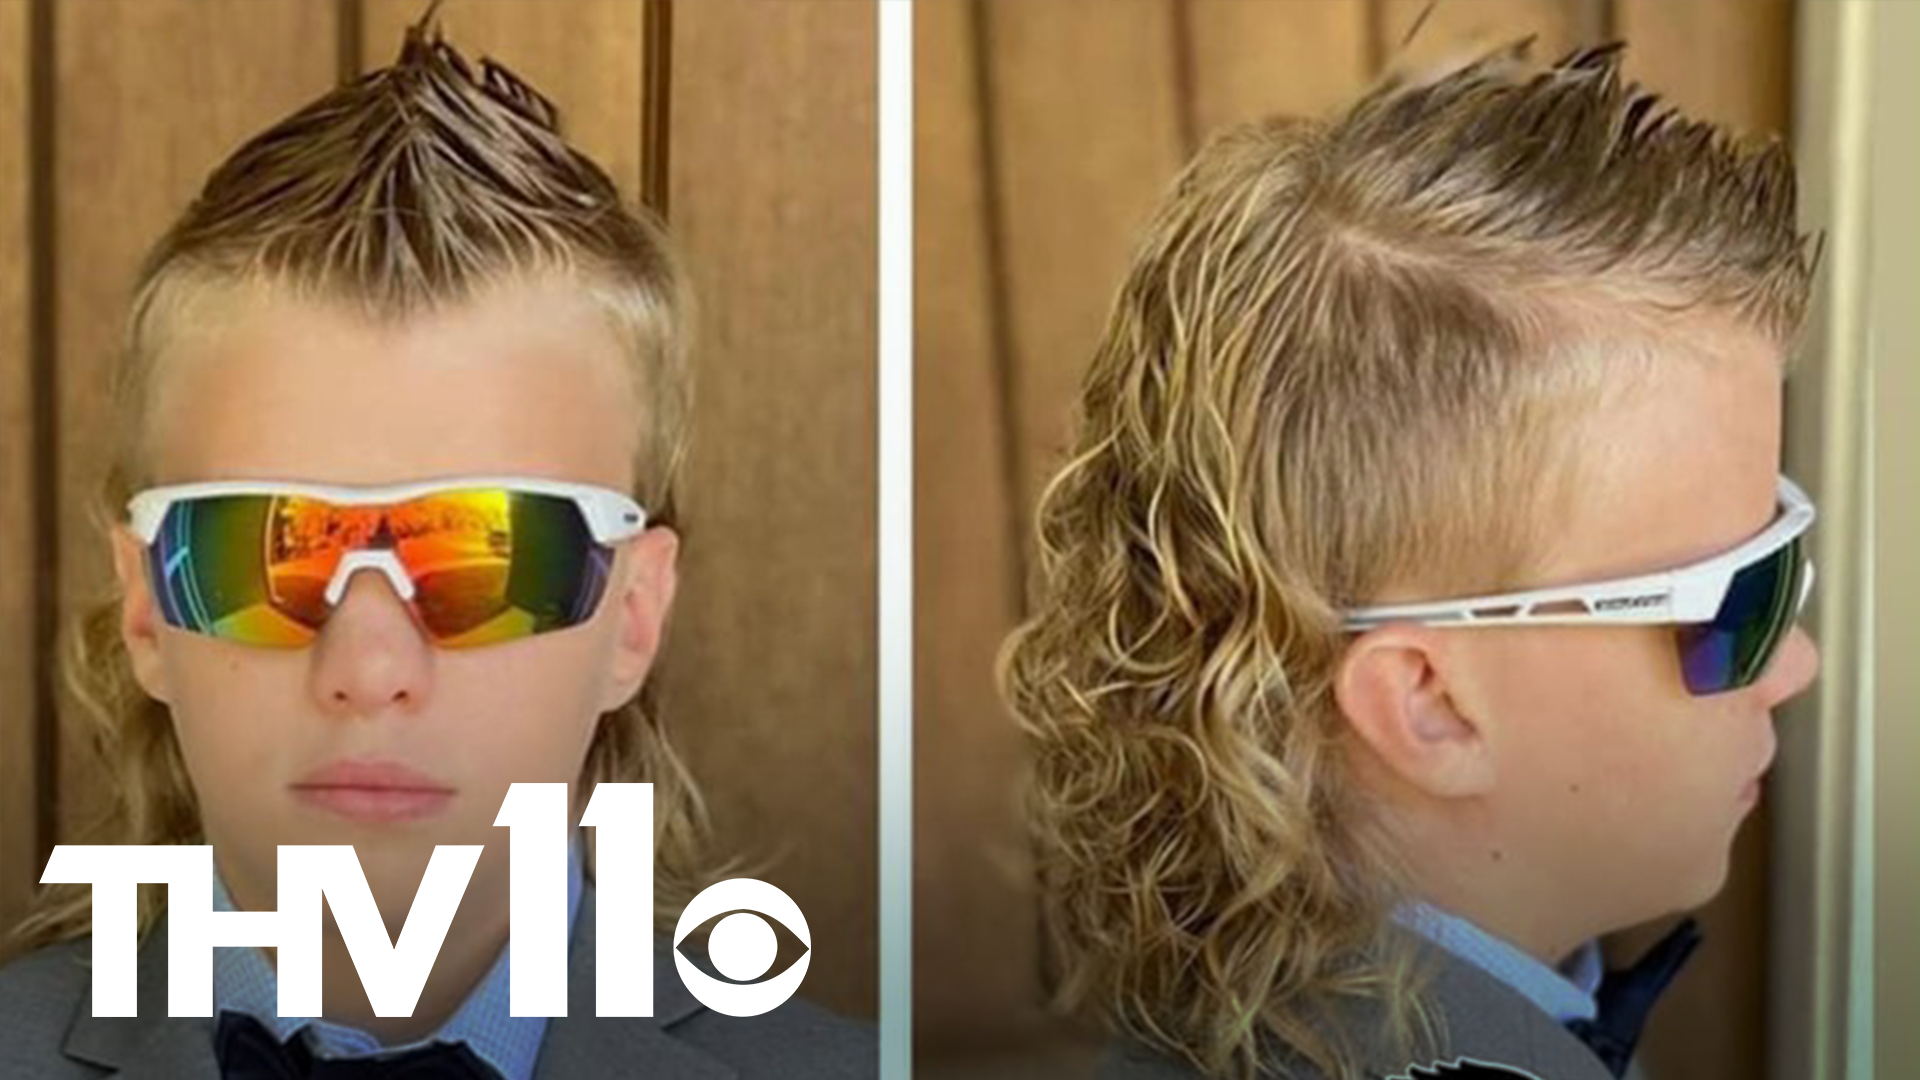 Sixth-grader, Allan Baltz was named first-place in the USA Mullet Championship. Baltz has pledged to donate the prize money to foster care if he wins.